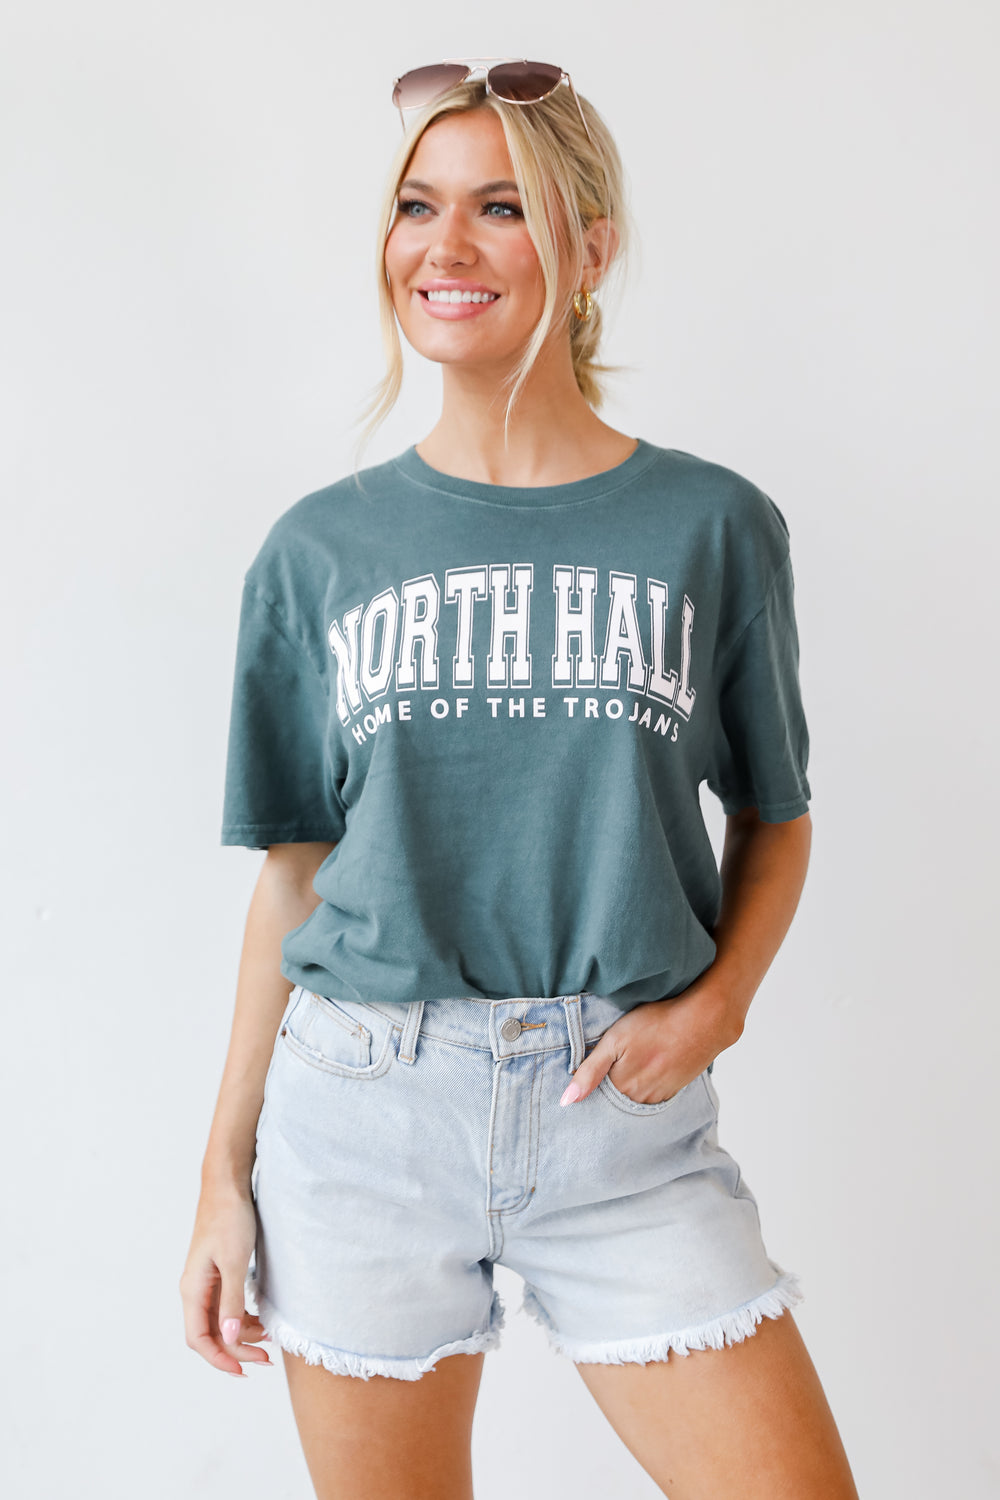 North Hall Home Of The Trojans Tee on model